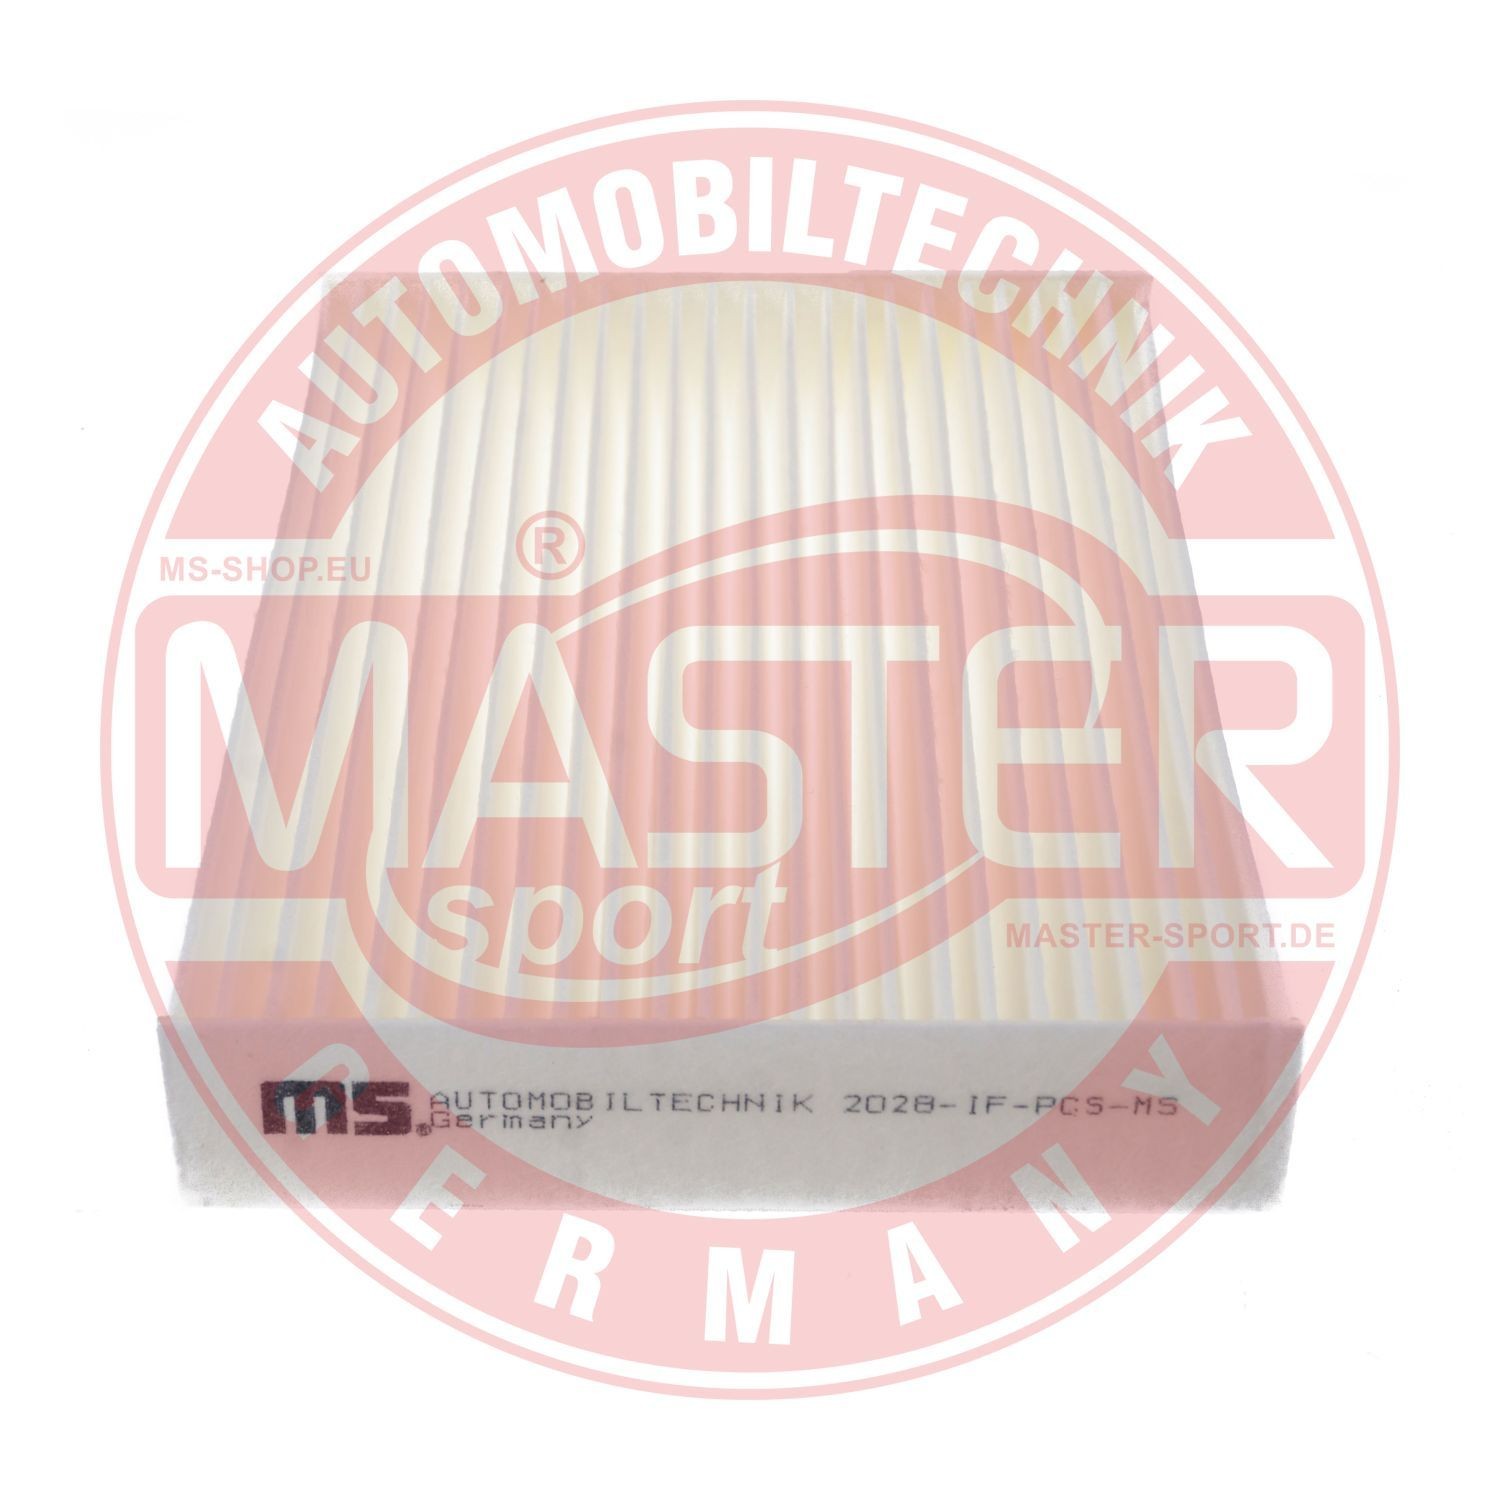 MASTER-SPORT BV420020280 Air conditioner filter Particulate Filter, 199 mm x 142 mm x 30 mm